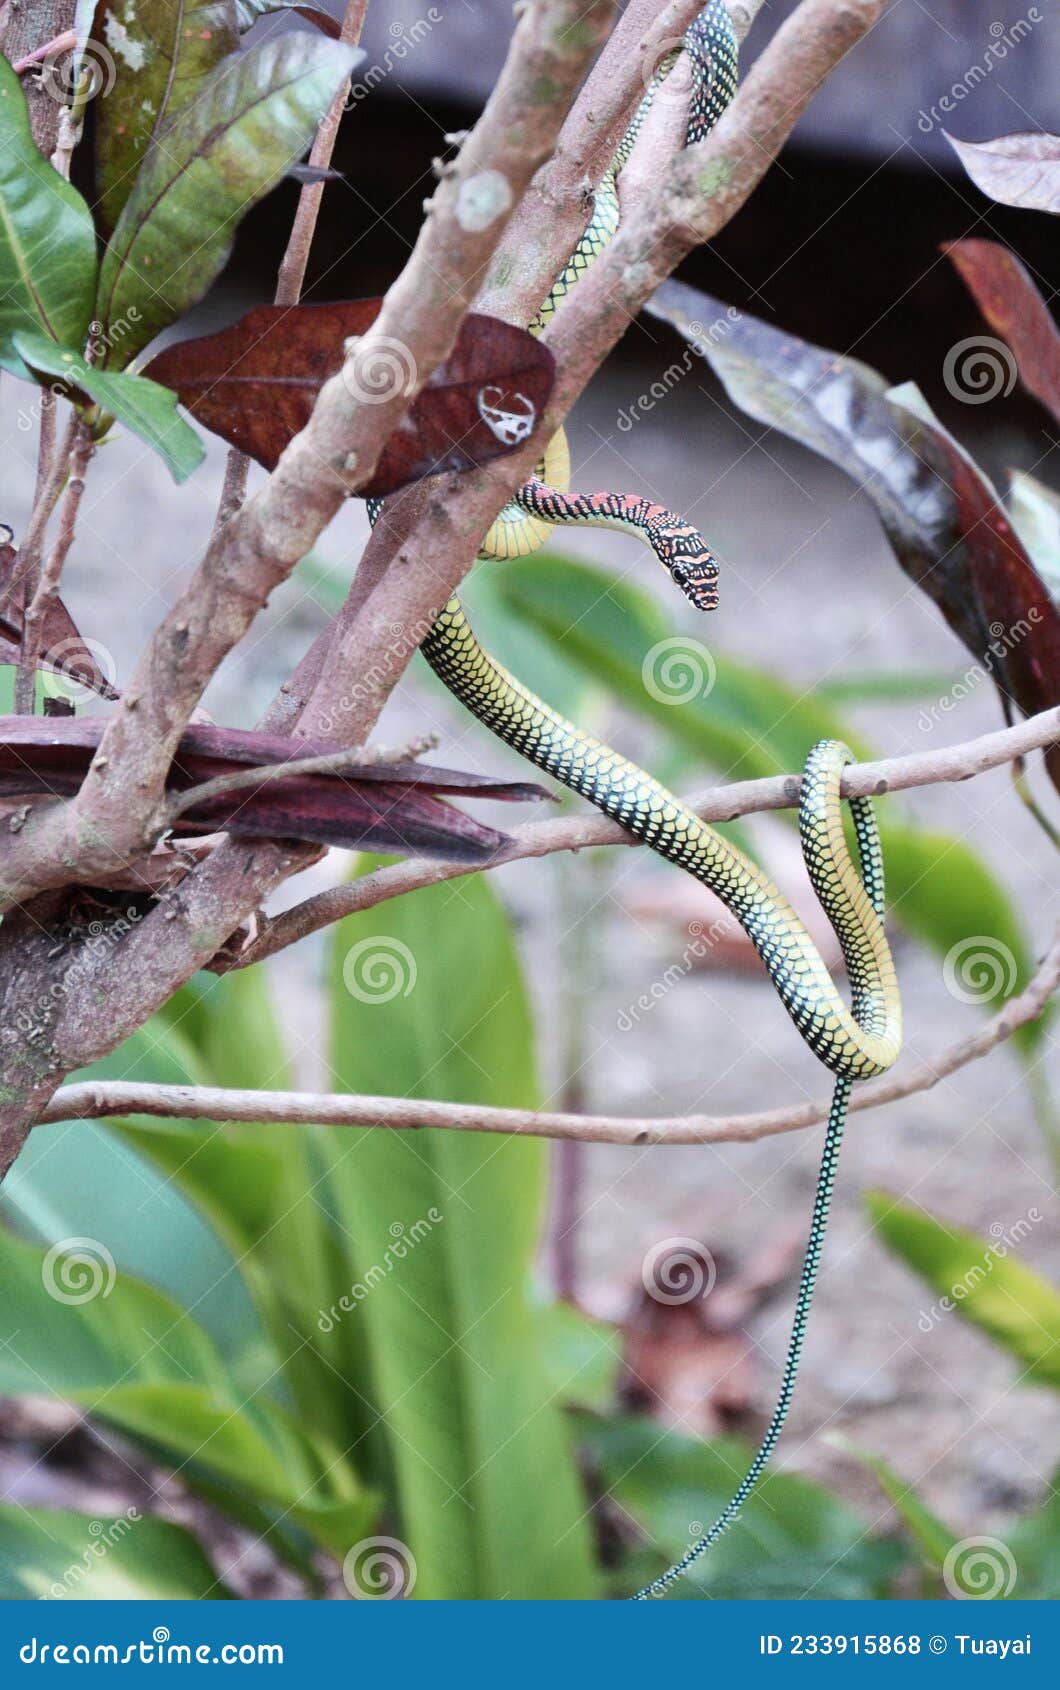 barred tree snake slither on branch plant tree